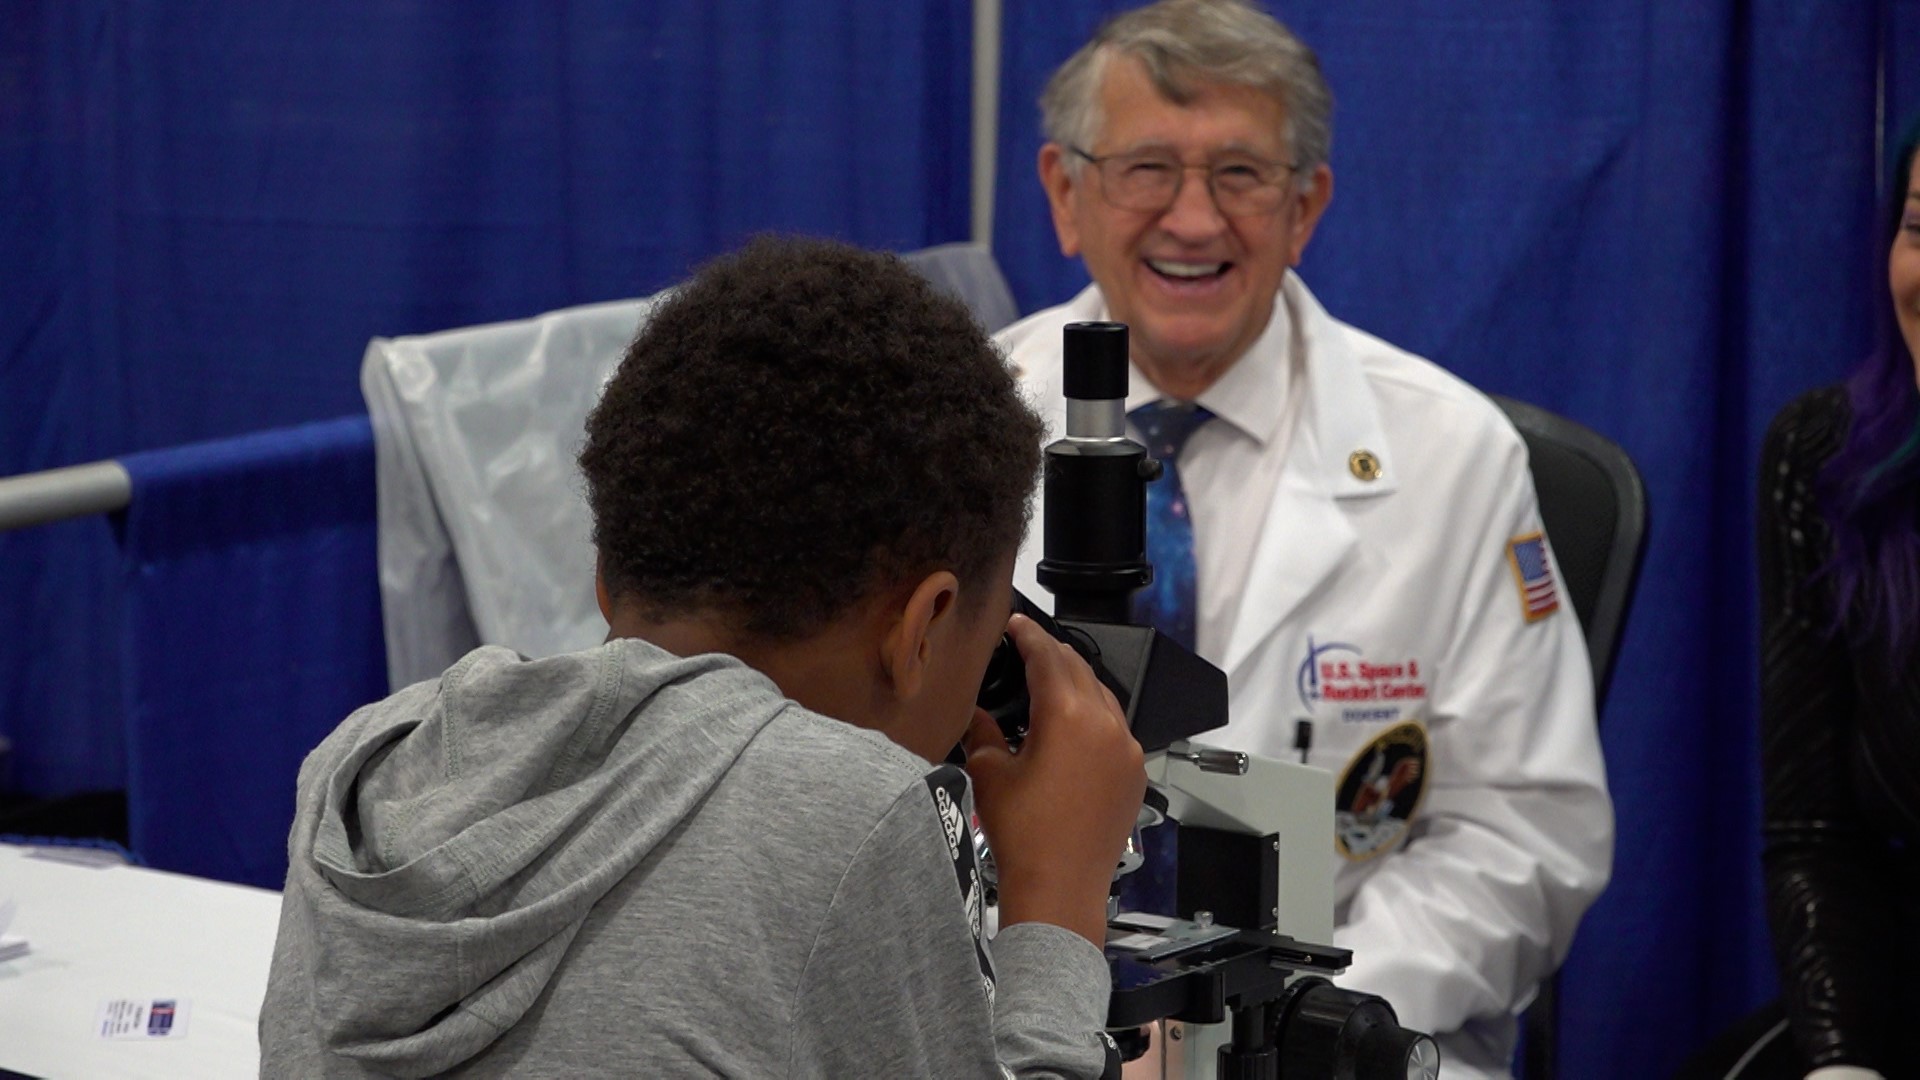 Alabama Science Week ended with the STEAMfest Festival in Huntsville. It encourages kids to get involved in science education